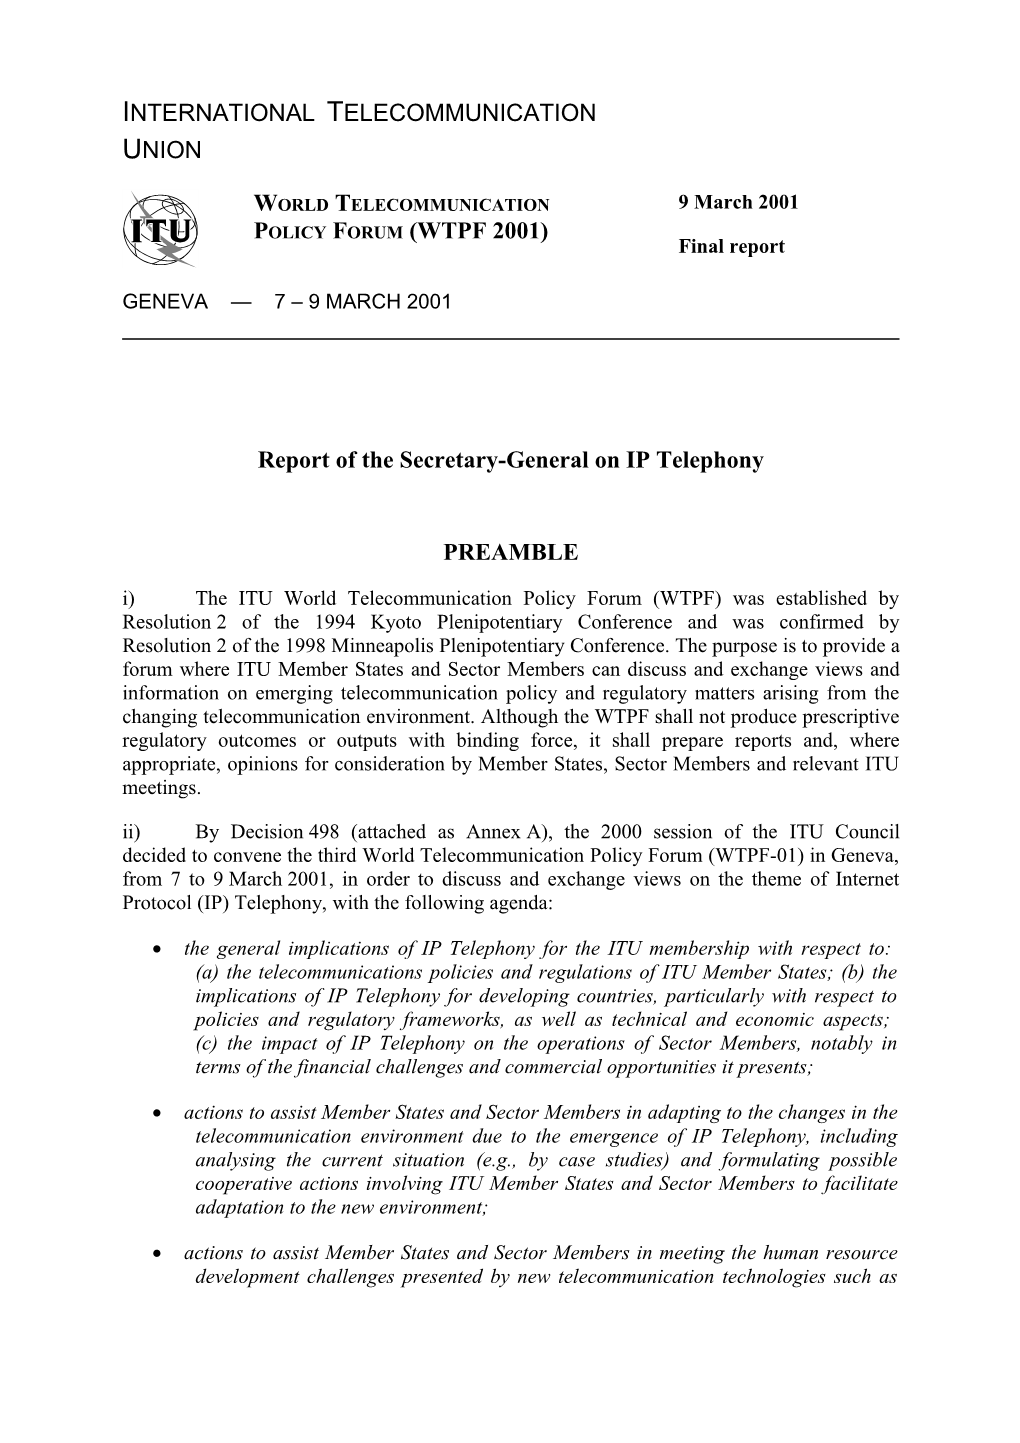 Final Report of the SG on IP Telephony